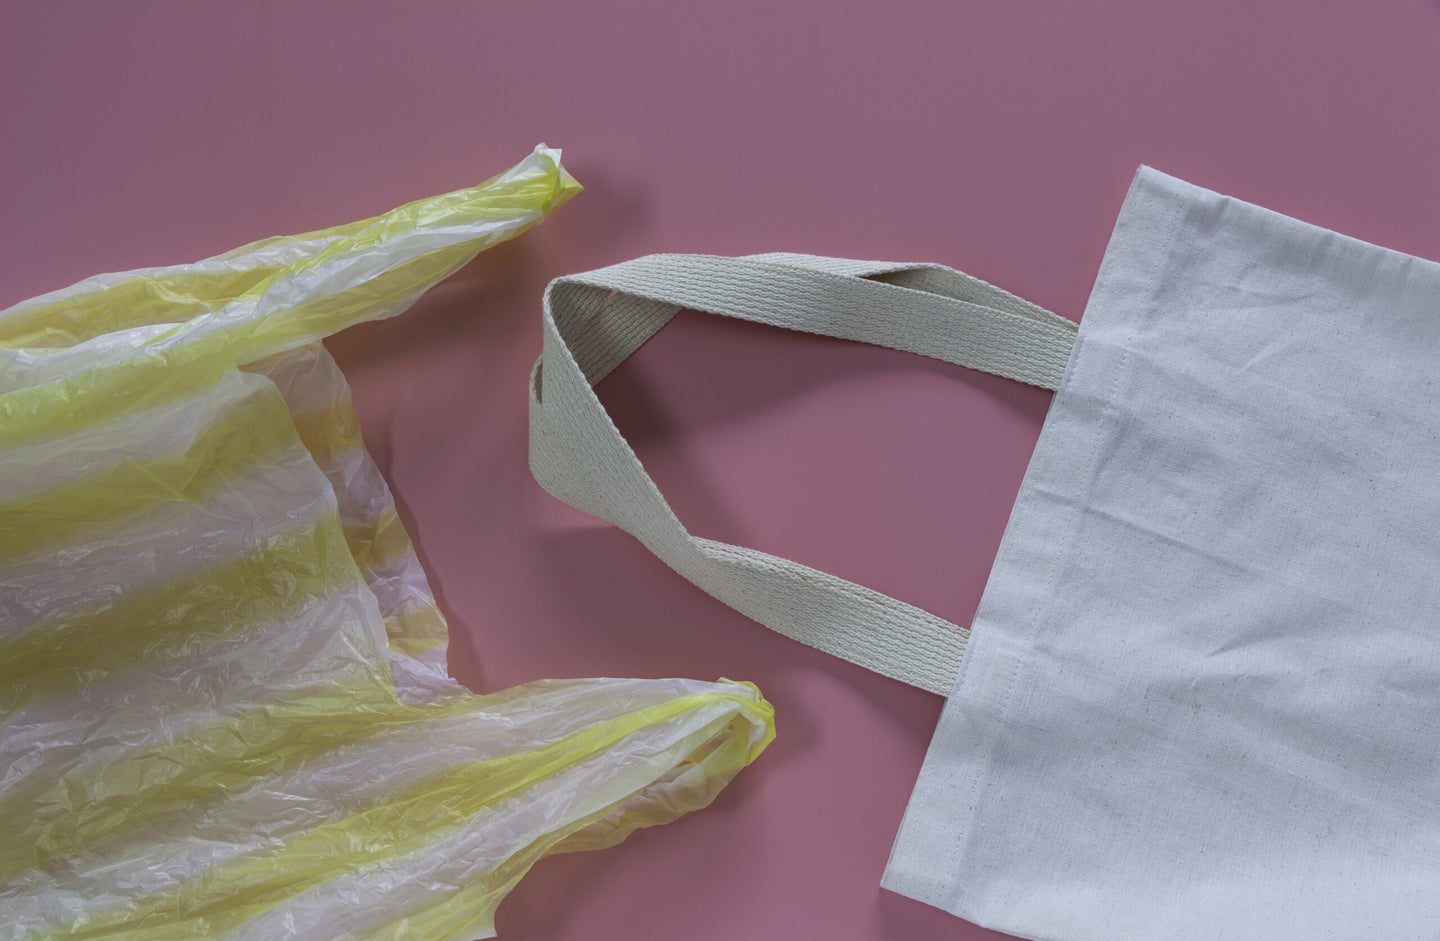 Plastic bags are still bad for the environment, despite misleading reports